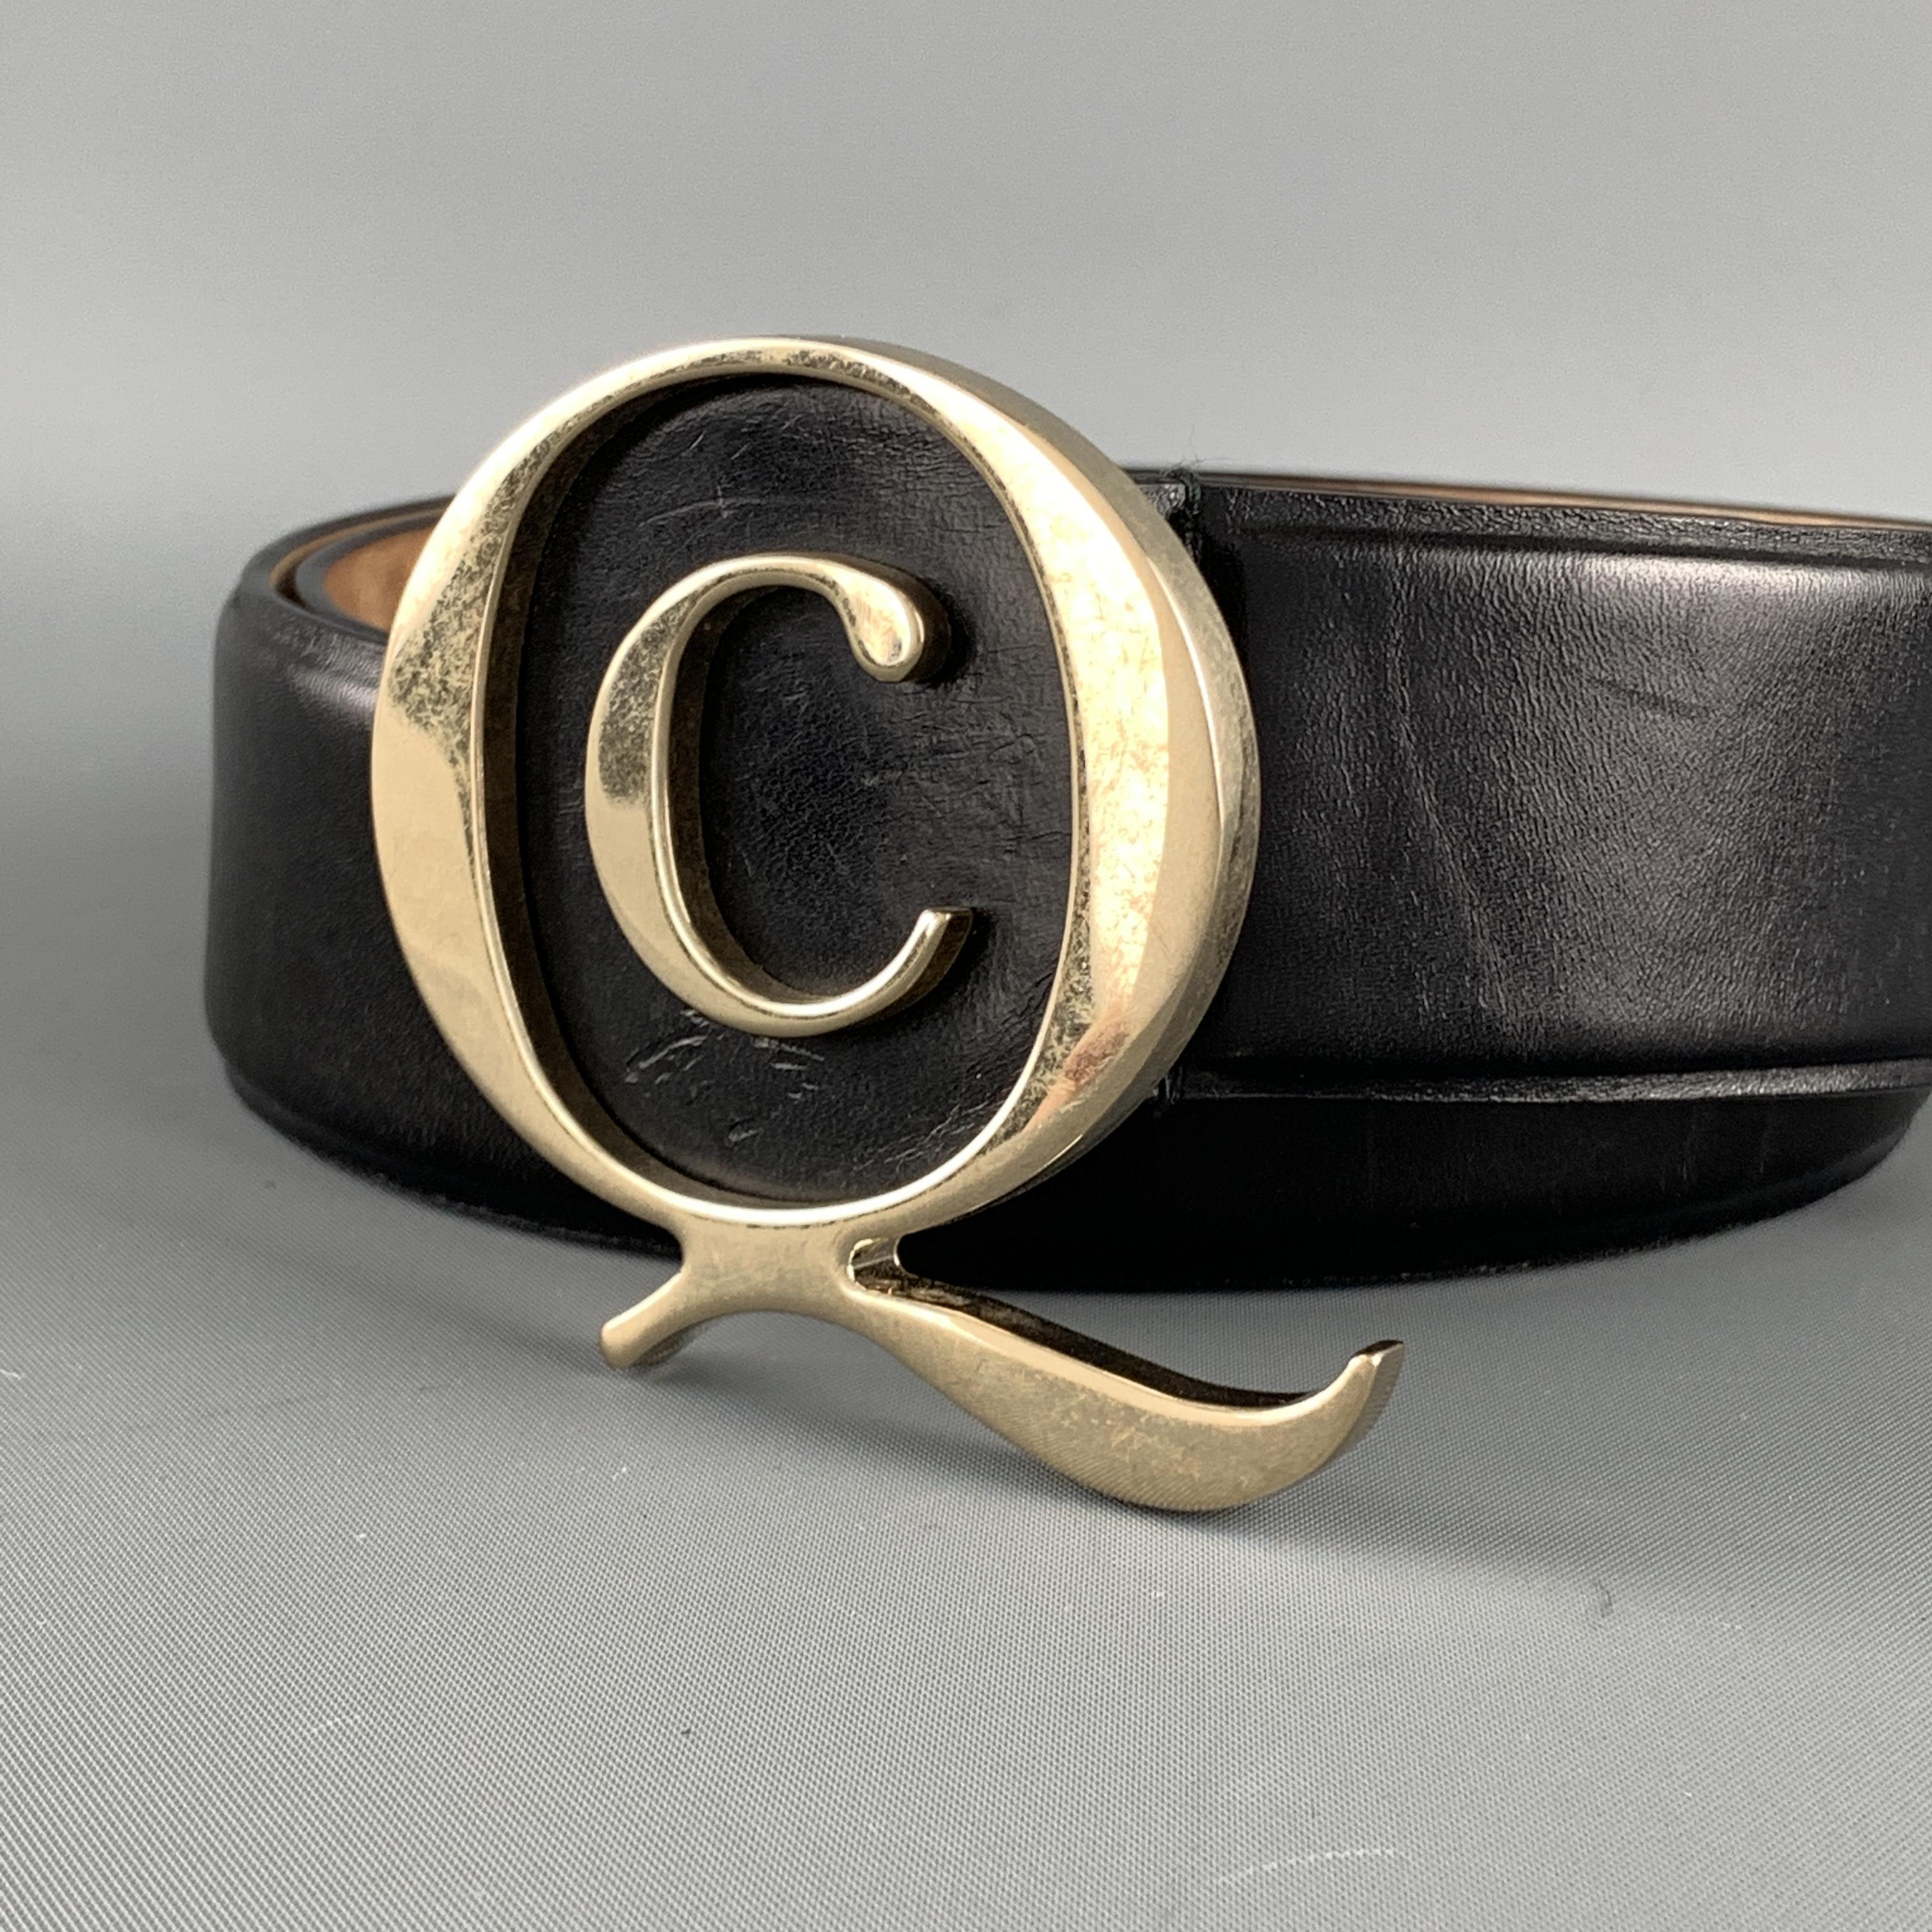 ALEXANDER MCQUEEN belt features a black leather strap with gold tone brass Q buckle. Made in Italy.

Very Good Pre-Owned Condition.
Marked: 85.34  196219.1766

Length: 39.5 in.
Width: 1.5 in.
Fits: 31-35 in.
Buckle: 6 x 7 cm.